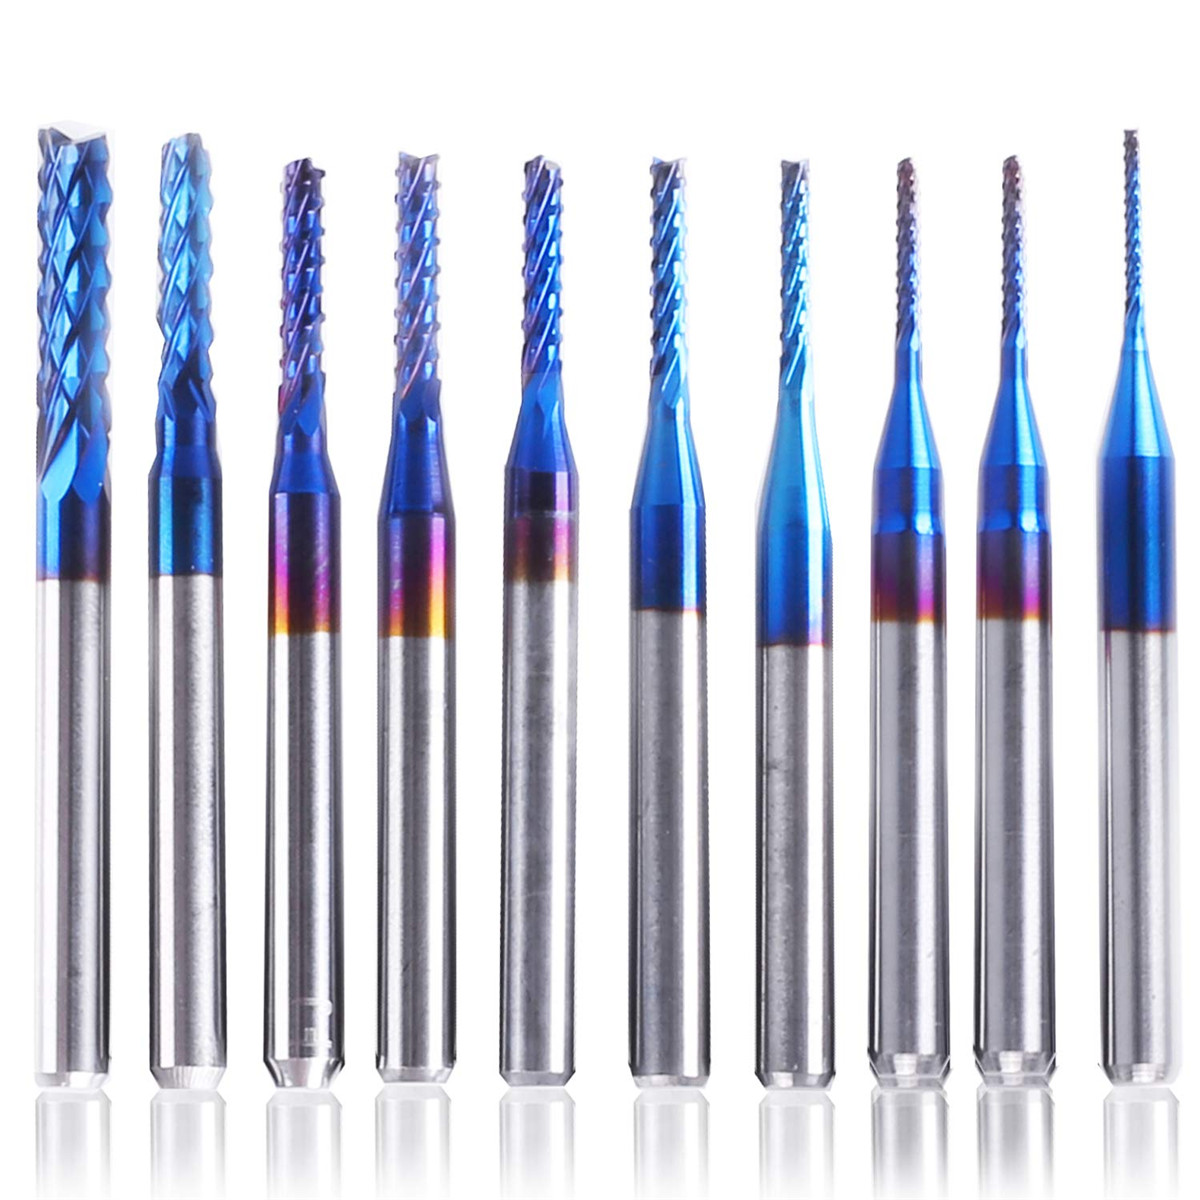 10Pcs-08-3mm-Blue-Nano-Coating-Engraving-Milling-Cutter-Carbide-End-Mill-CNC-Router-Bits-18-Inch-Sha-1589441-6